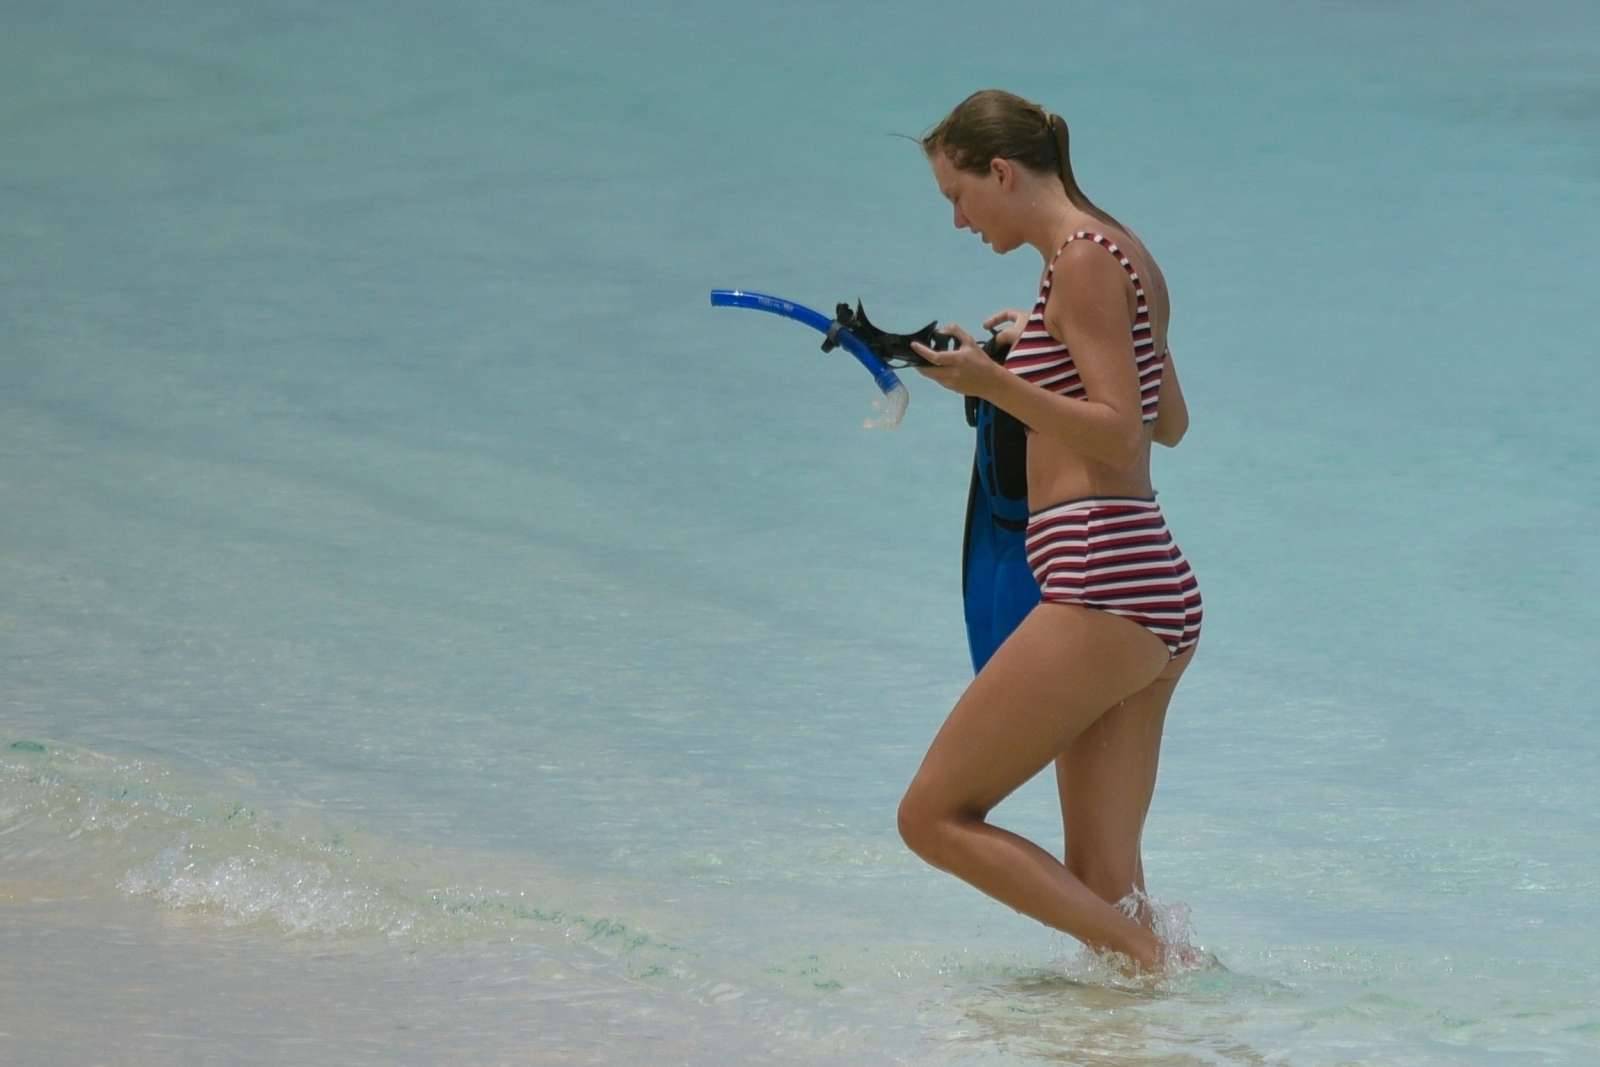 Taylor Swift in Bikini at the beach in Turks and Caicos. 